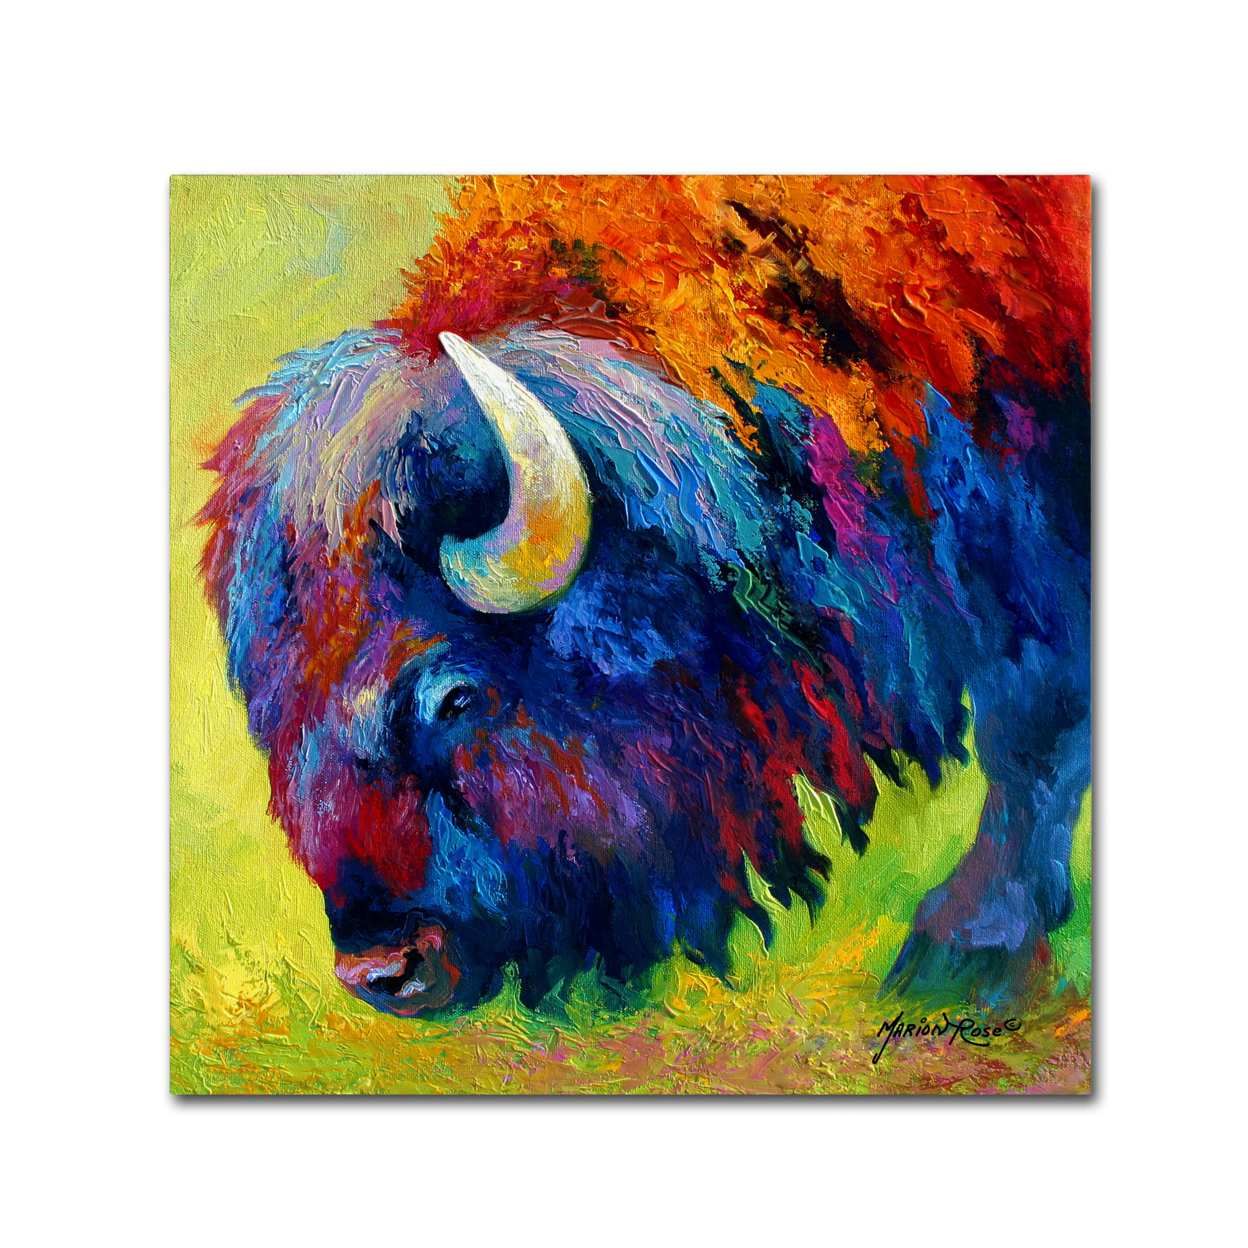 Marion Rose 'Bison Portrait II' Ready To Hang Canvas Art 14 X 14 Inches Made In USA